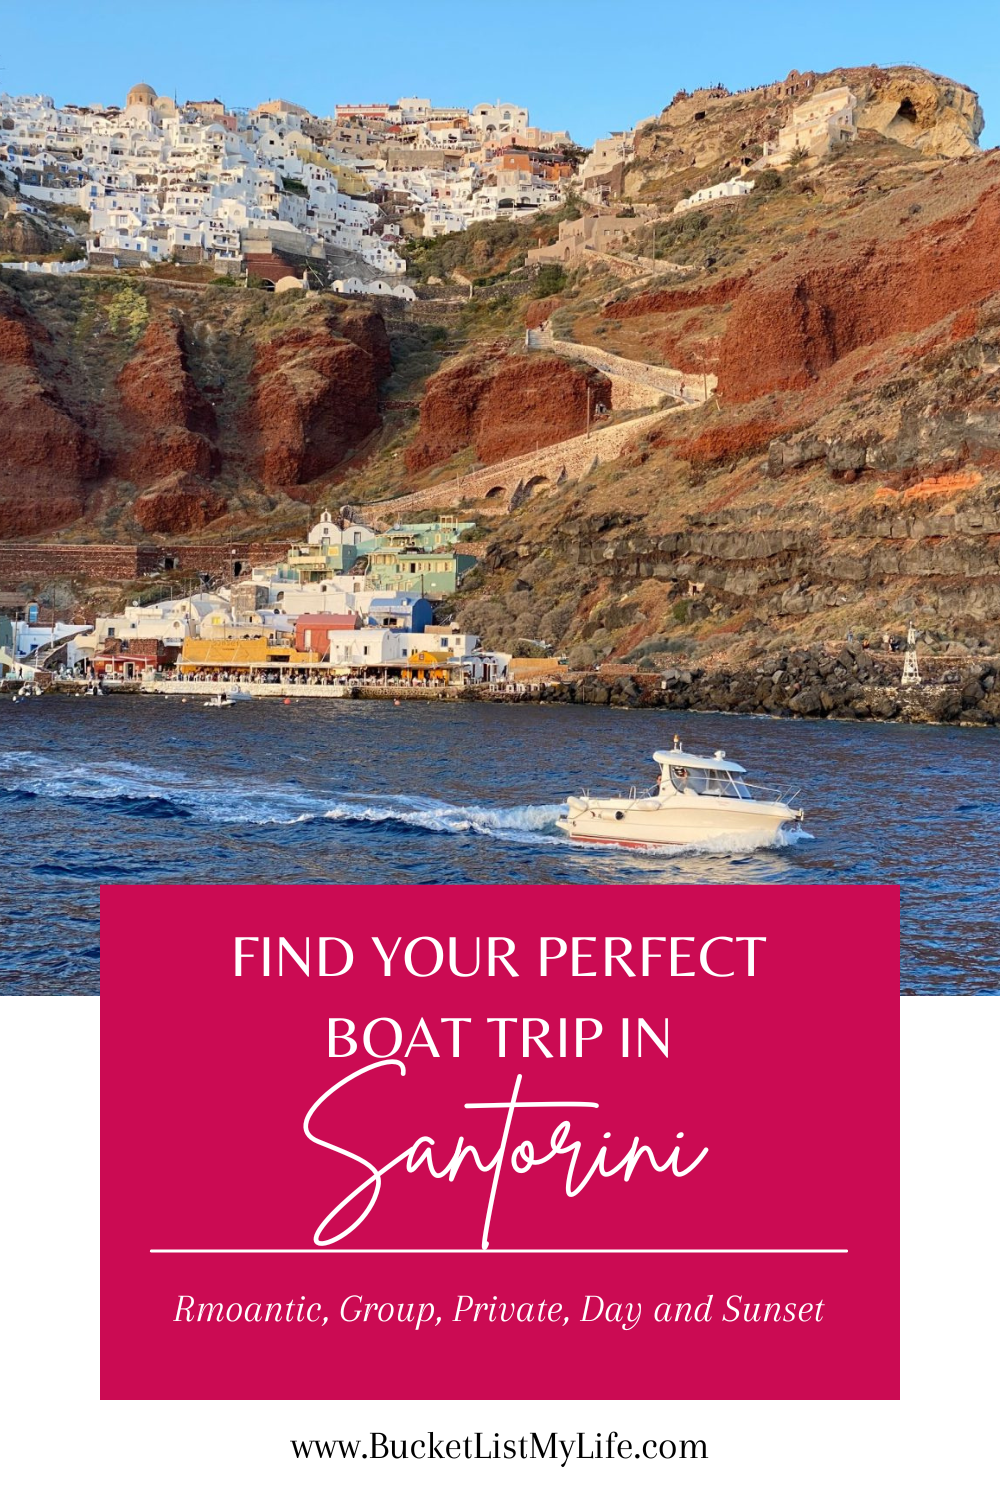 7 Best Santorini Boat Tours for an Unforgettable Experience